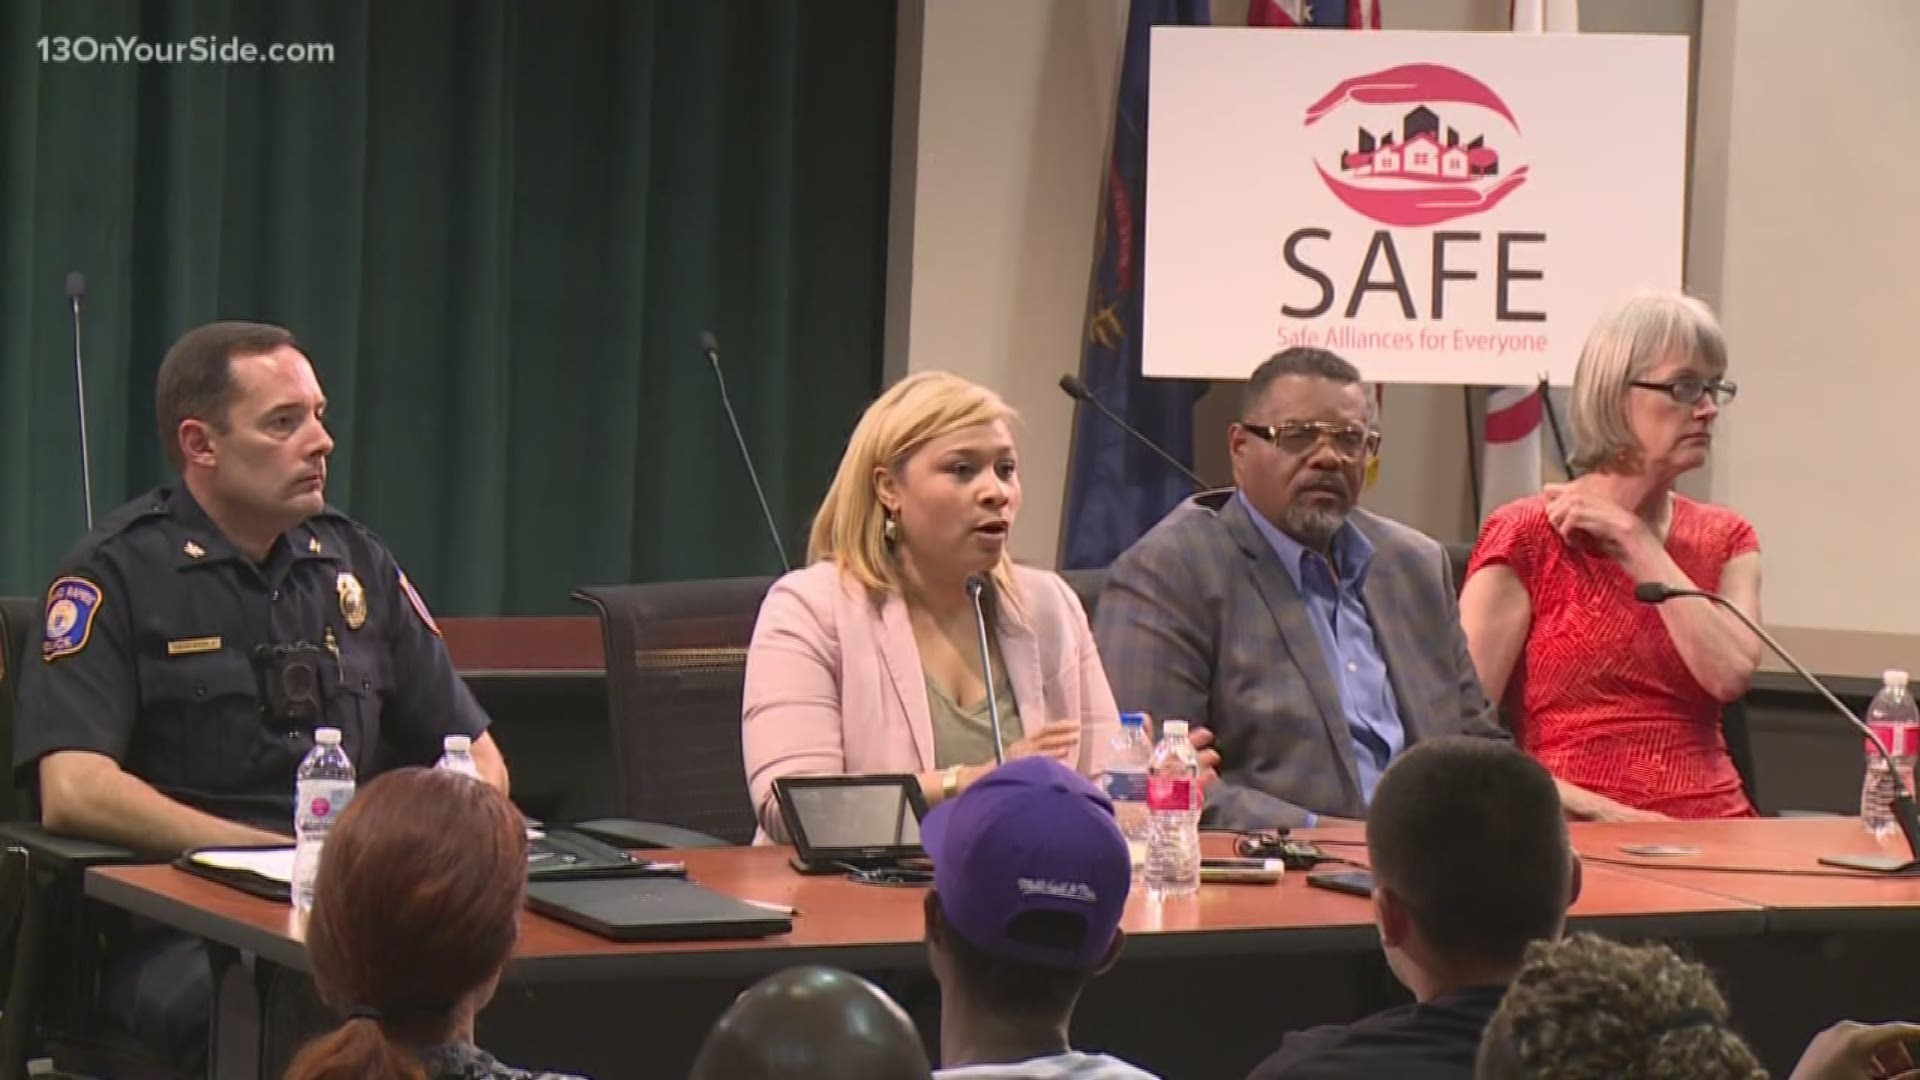 Grand Rapids Safe Task Force hosts pitch night for ideas on reducing gun violence